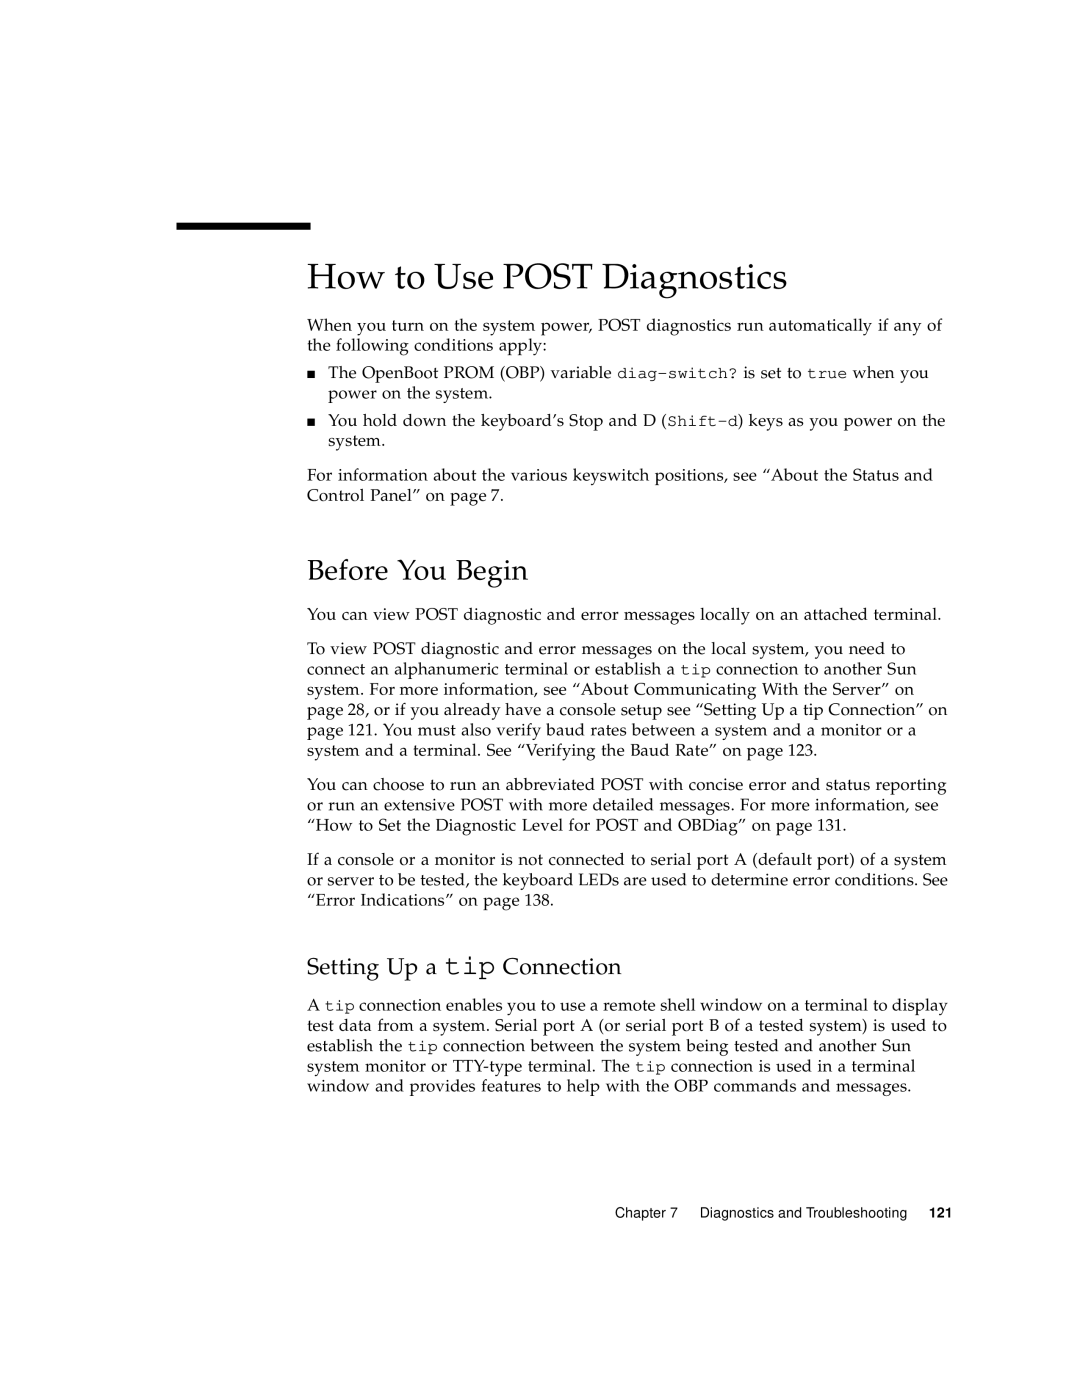 Sun Microsystems 220R manual How to Use POST Diagnostics, Setting Up a tip Connection, Before You Begin 